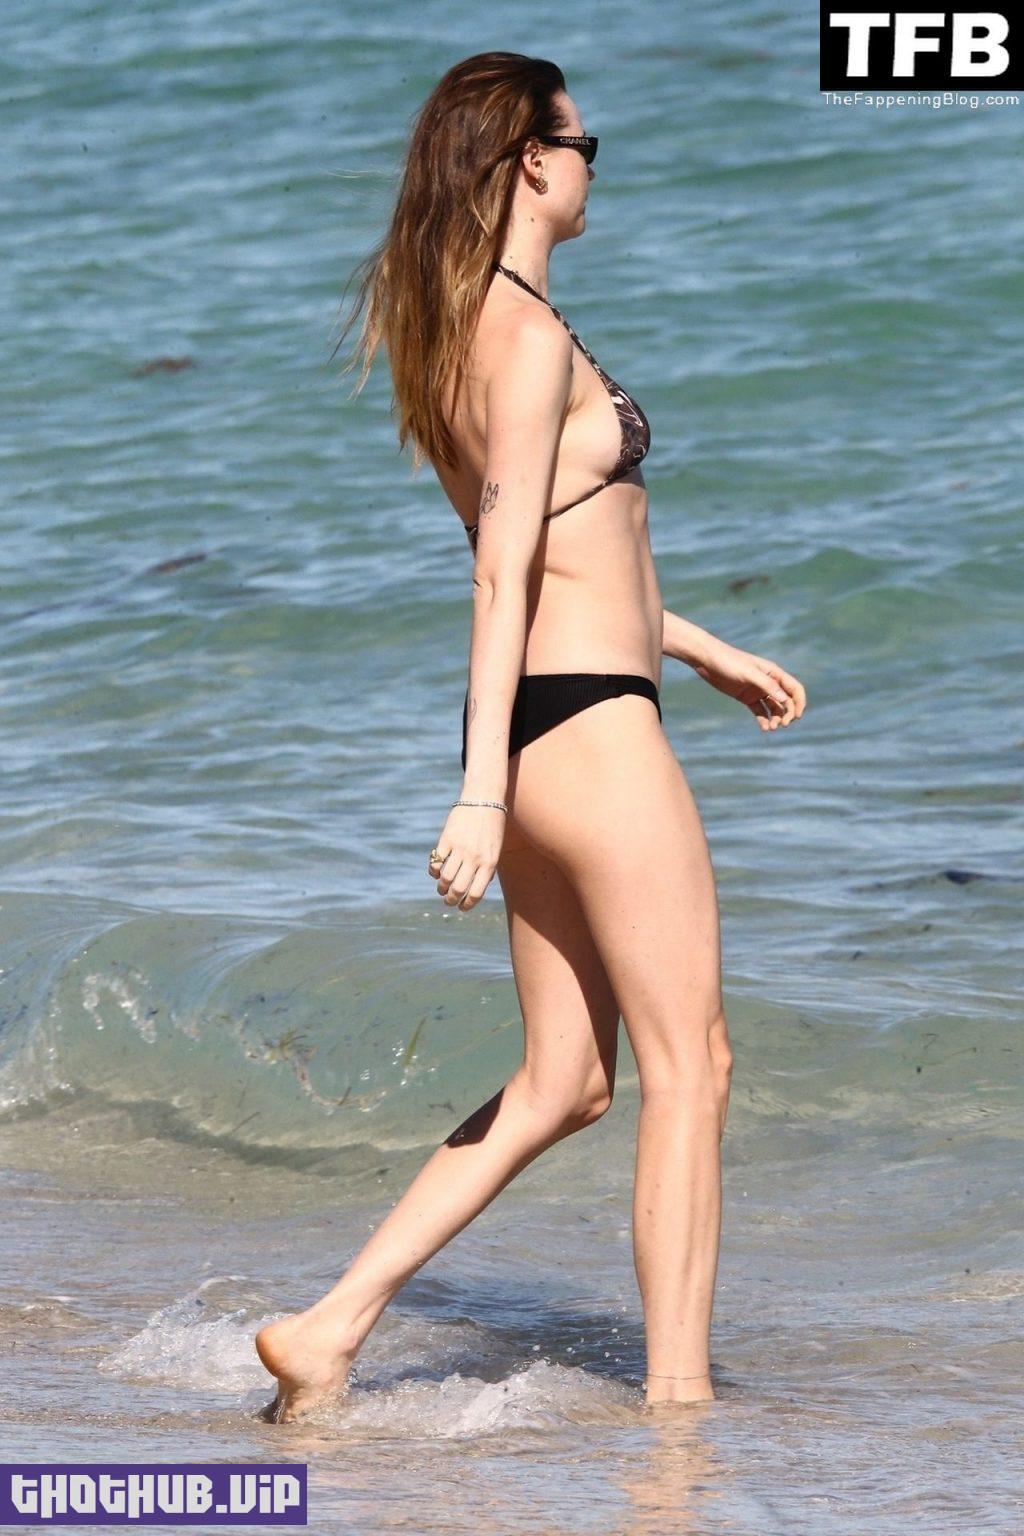 Behati Prinsloo Sexy The Fappening Blog 18